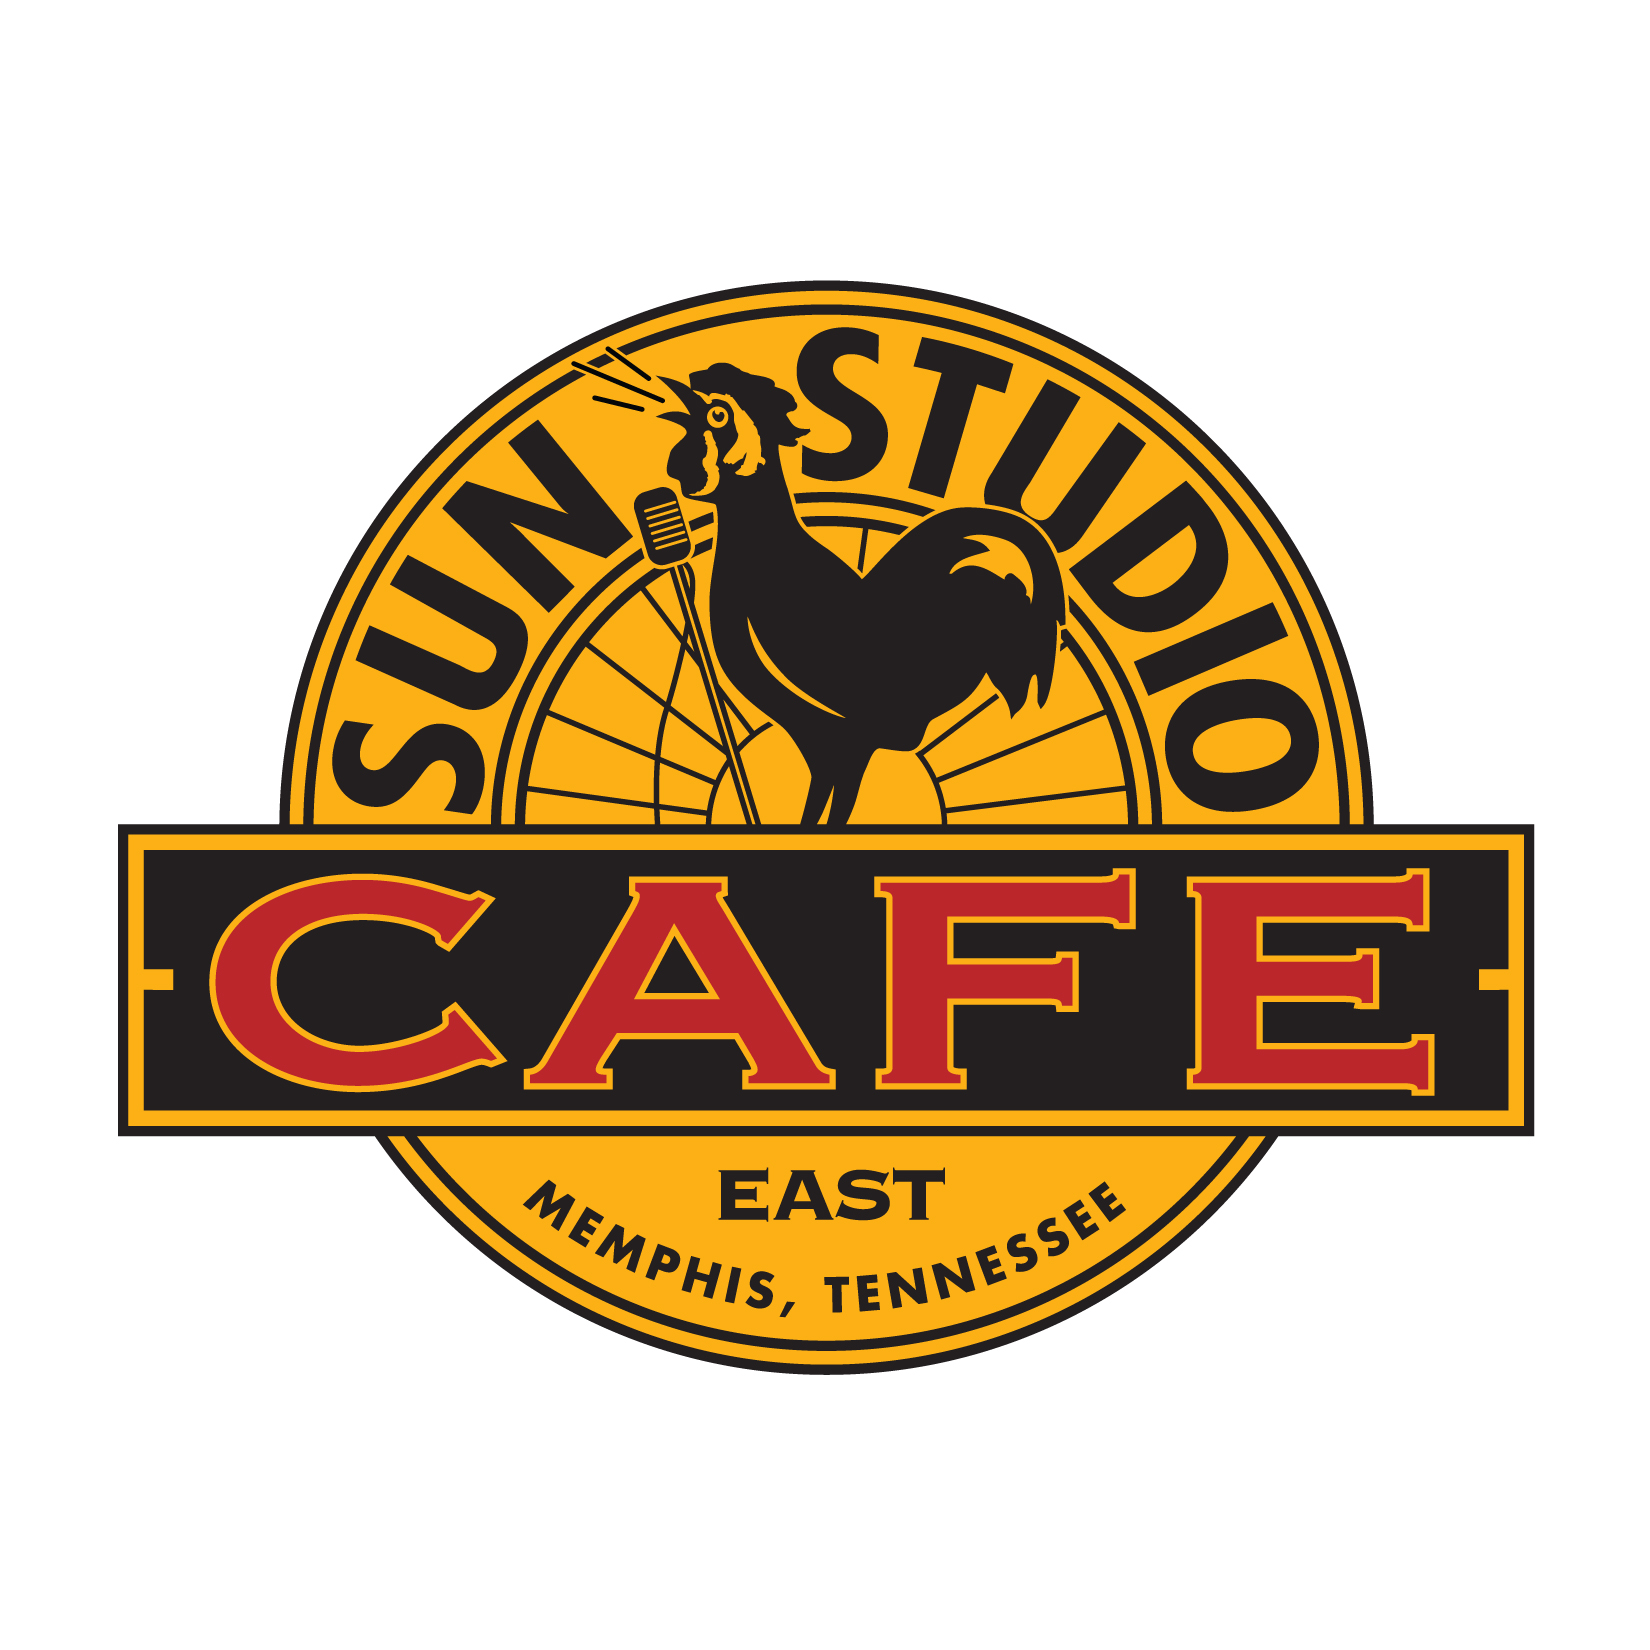  Sun Studio Cafe logo and branding  Branding creative and design by Chuck Mitchell  Updated from original Sun Studio logo with addition of rooster’s microphone and stand 